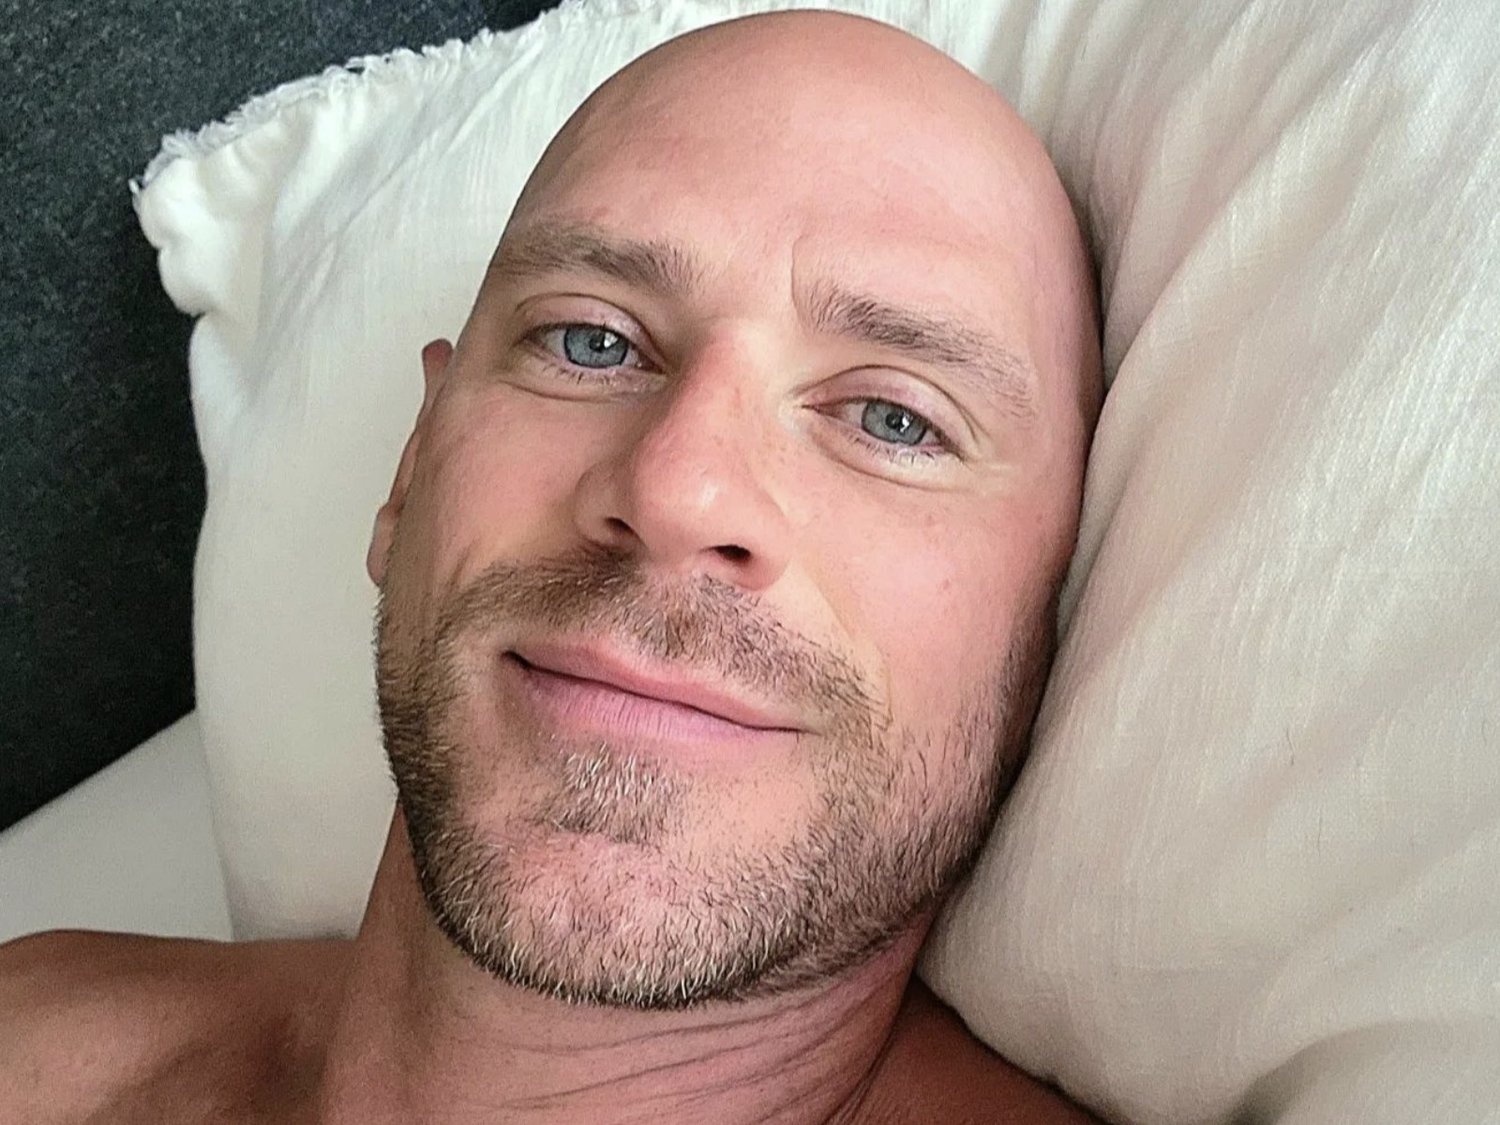 22 Astounding Facts About Johnny Sins - Facts.net